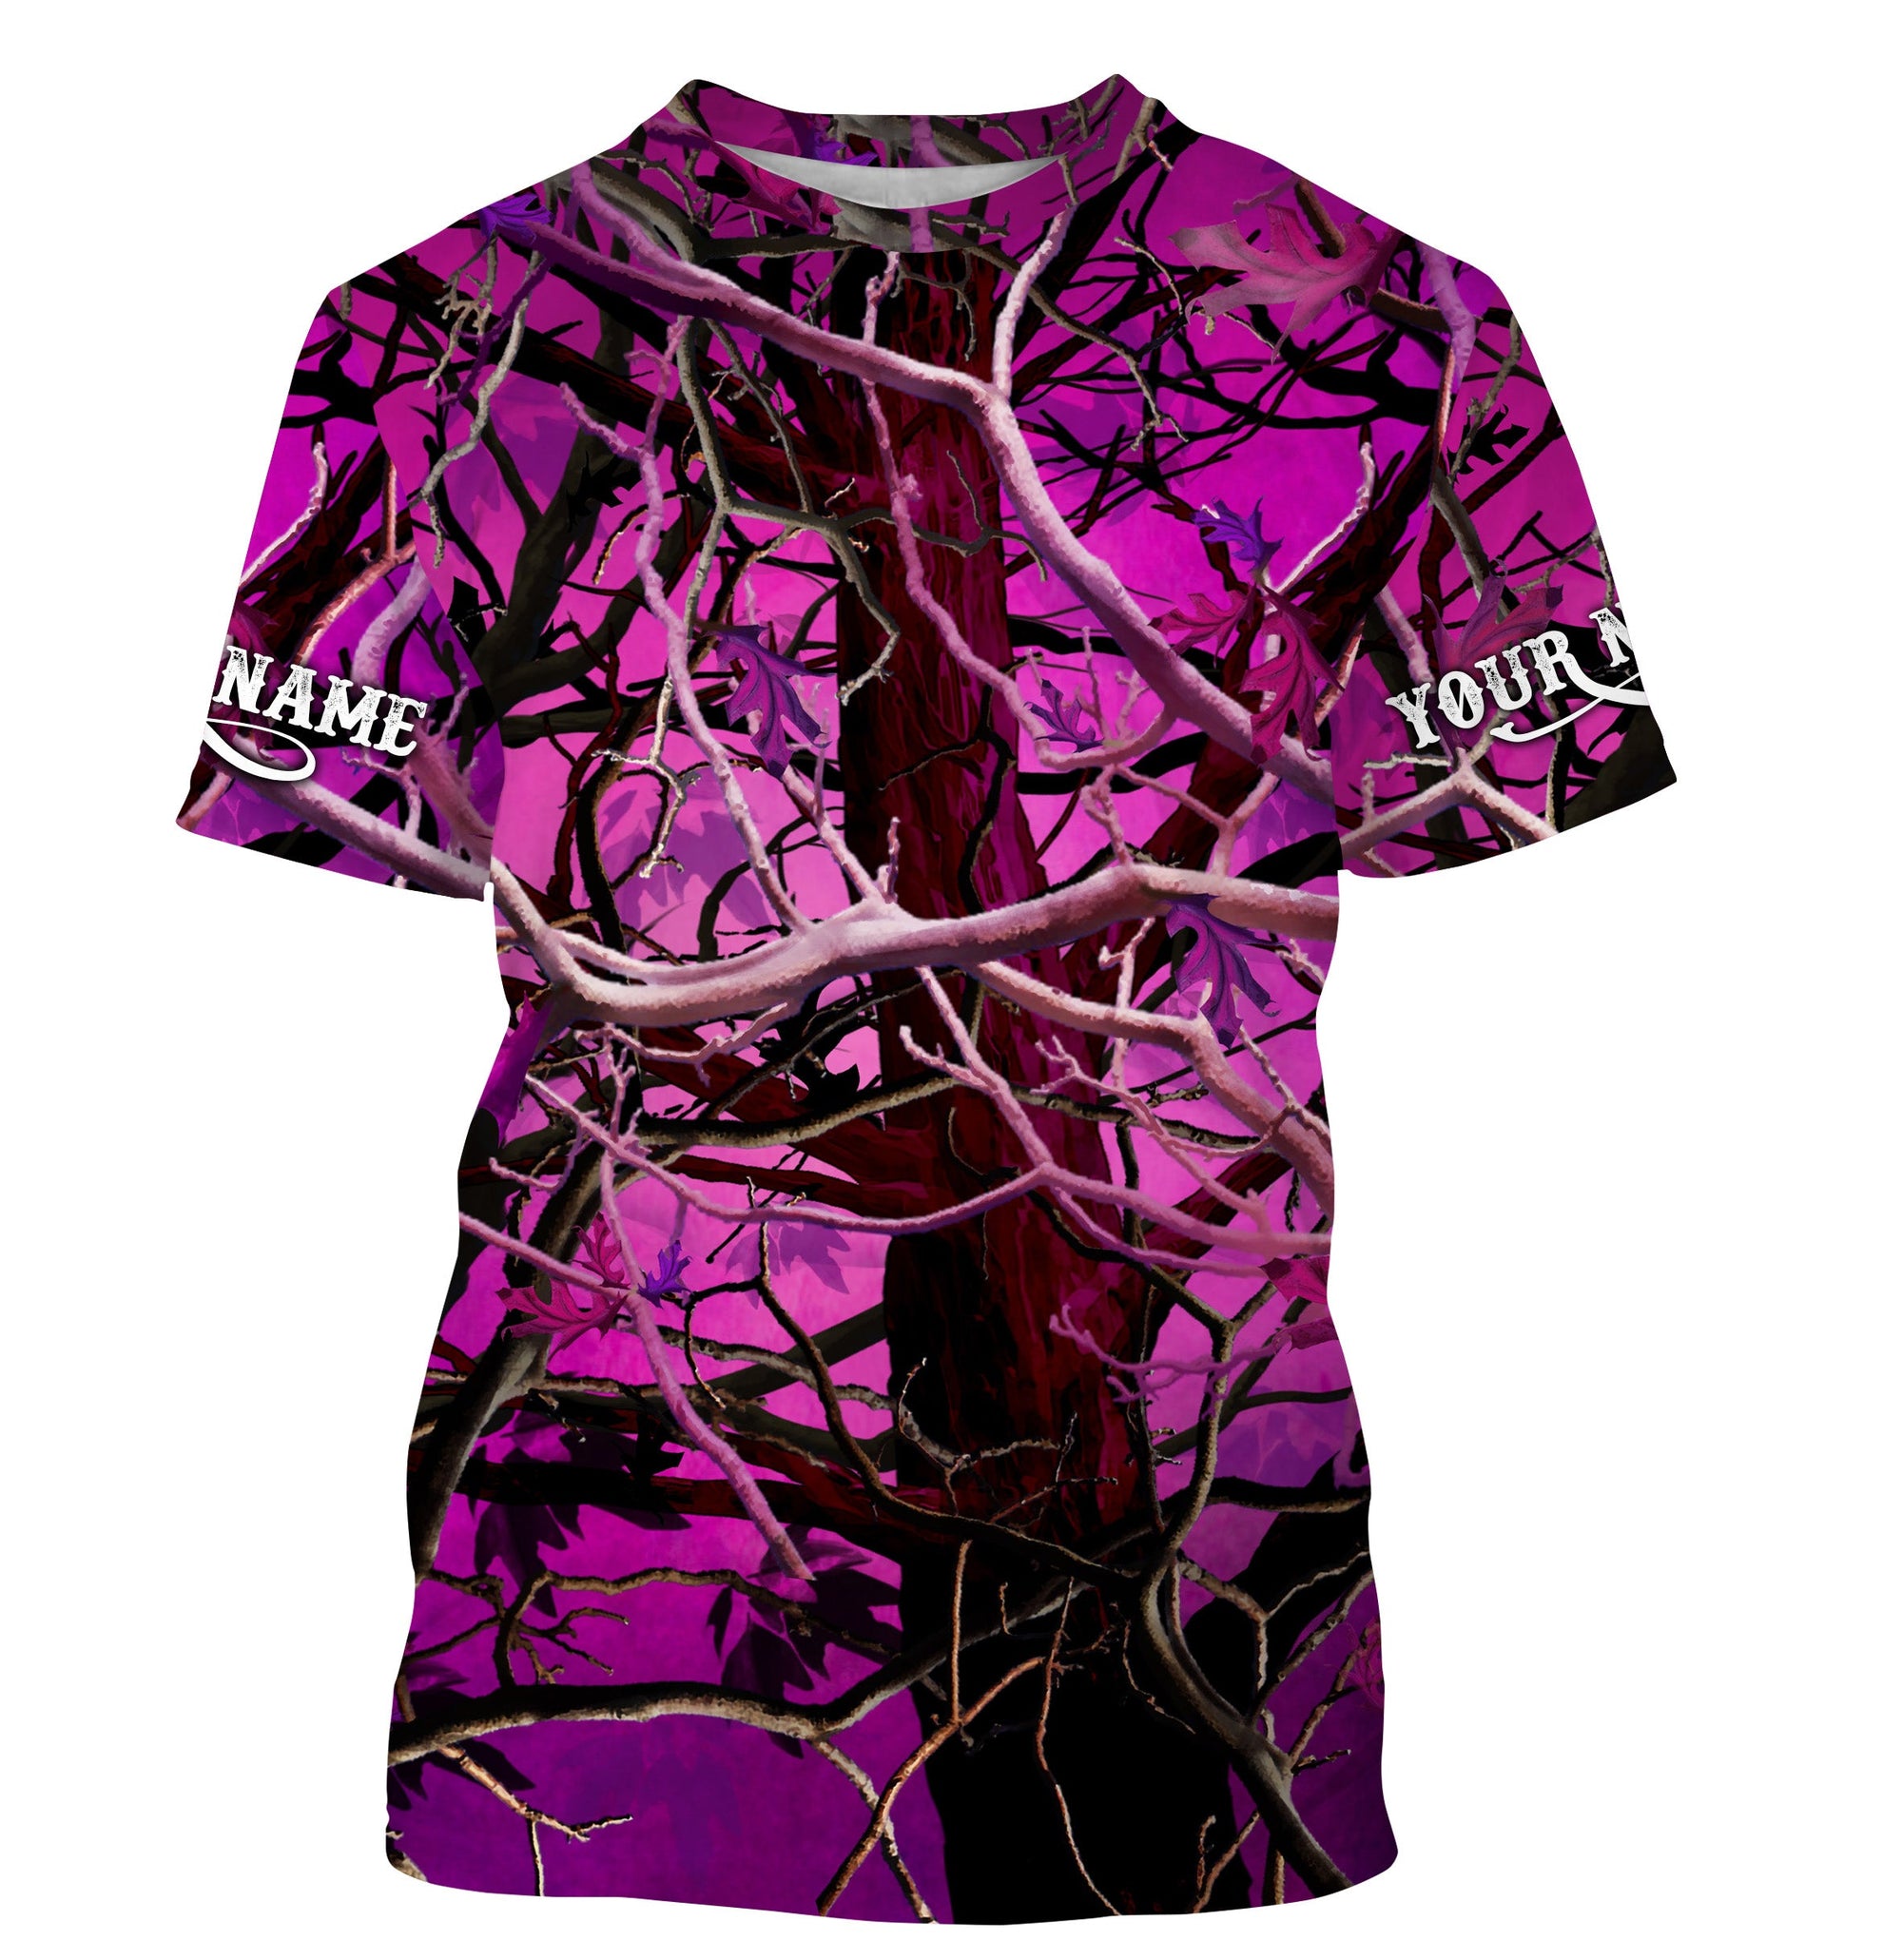 pink-tree-camouflage-country-girl-custom-all-over-printed-shirts-pink-camo-country-shirts-i-fishing-t-shirt